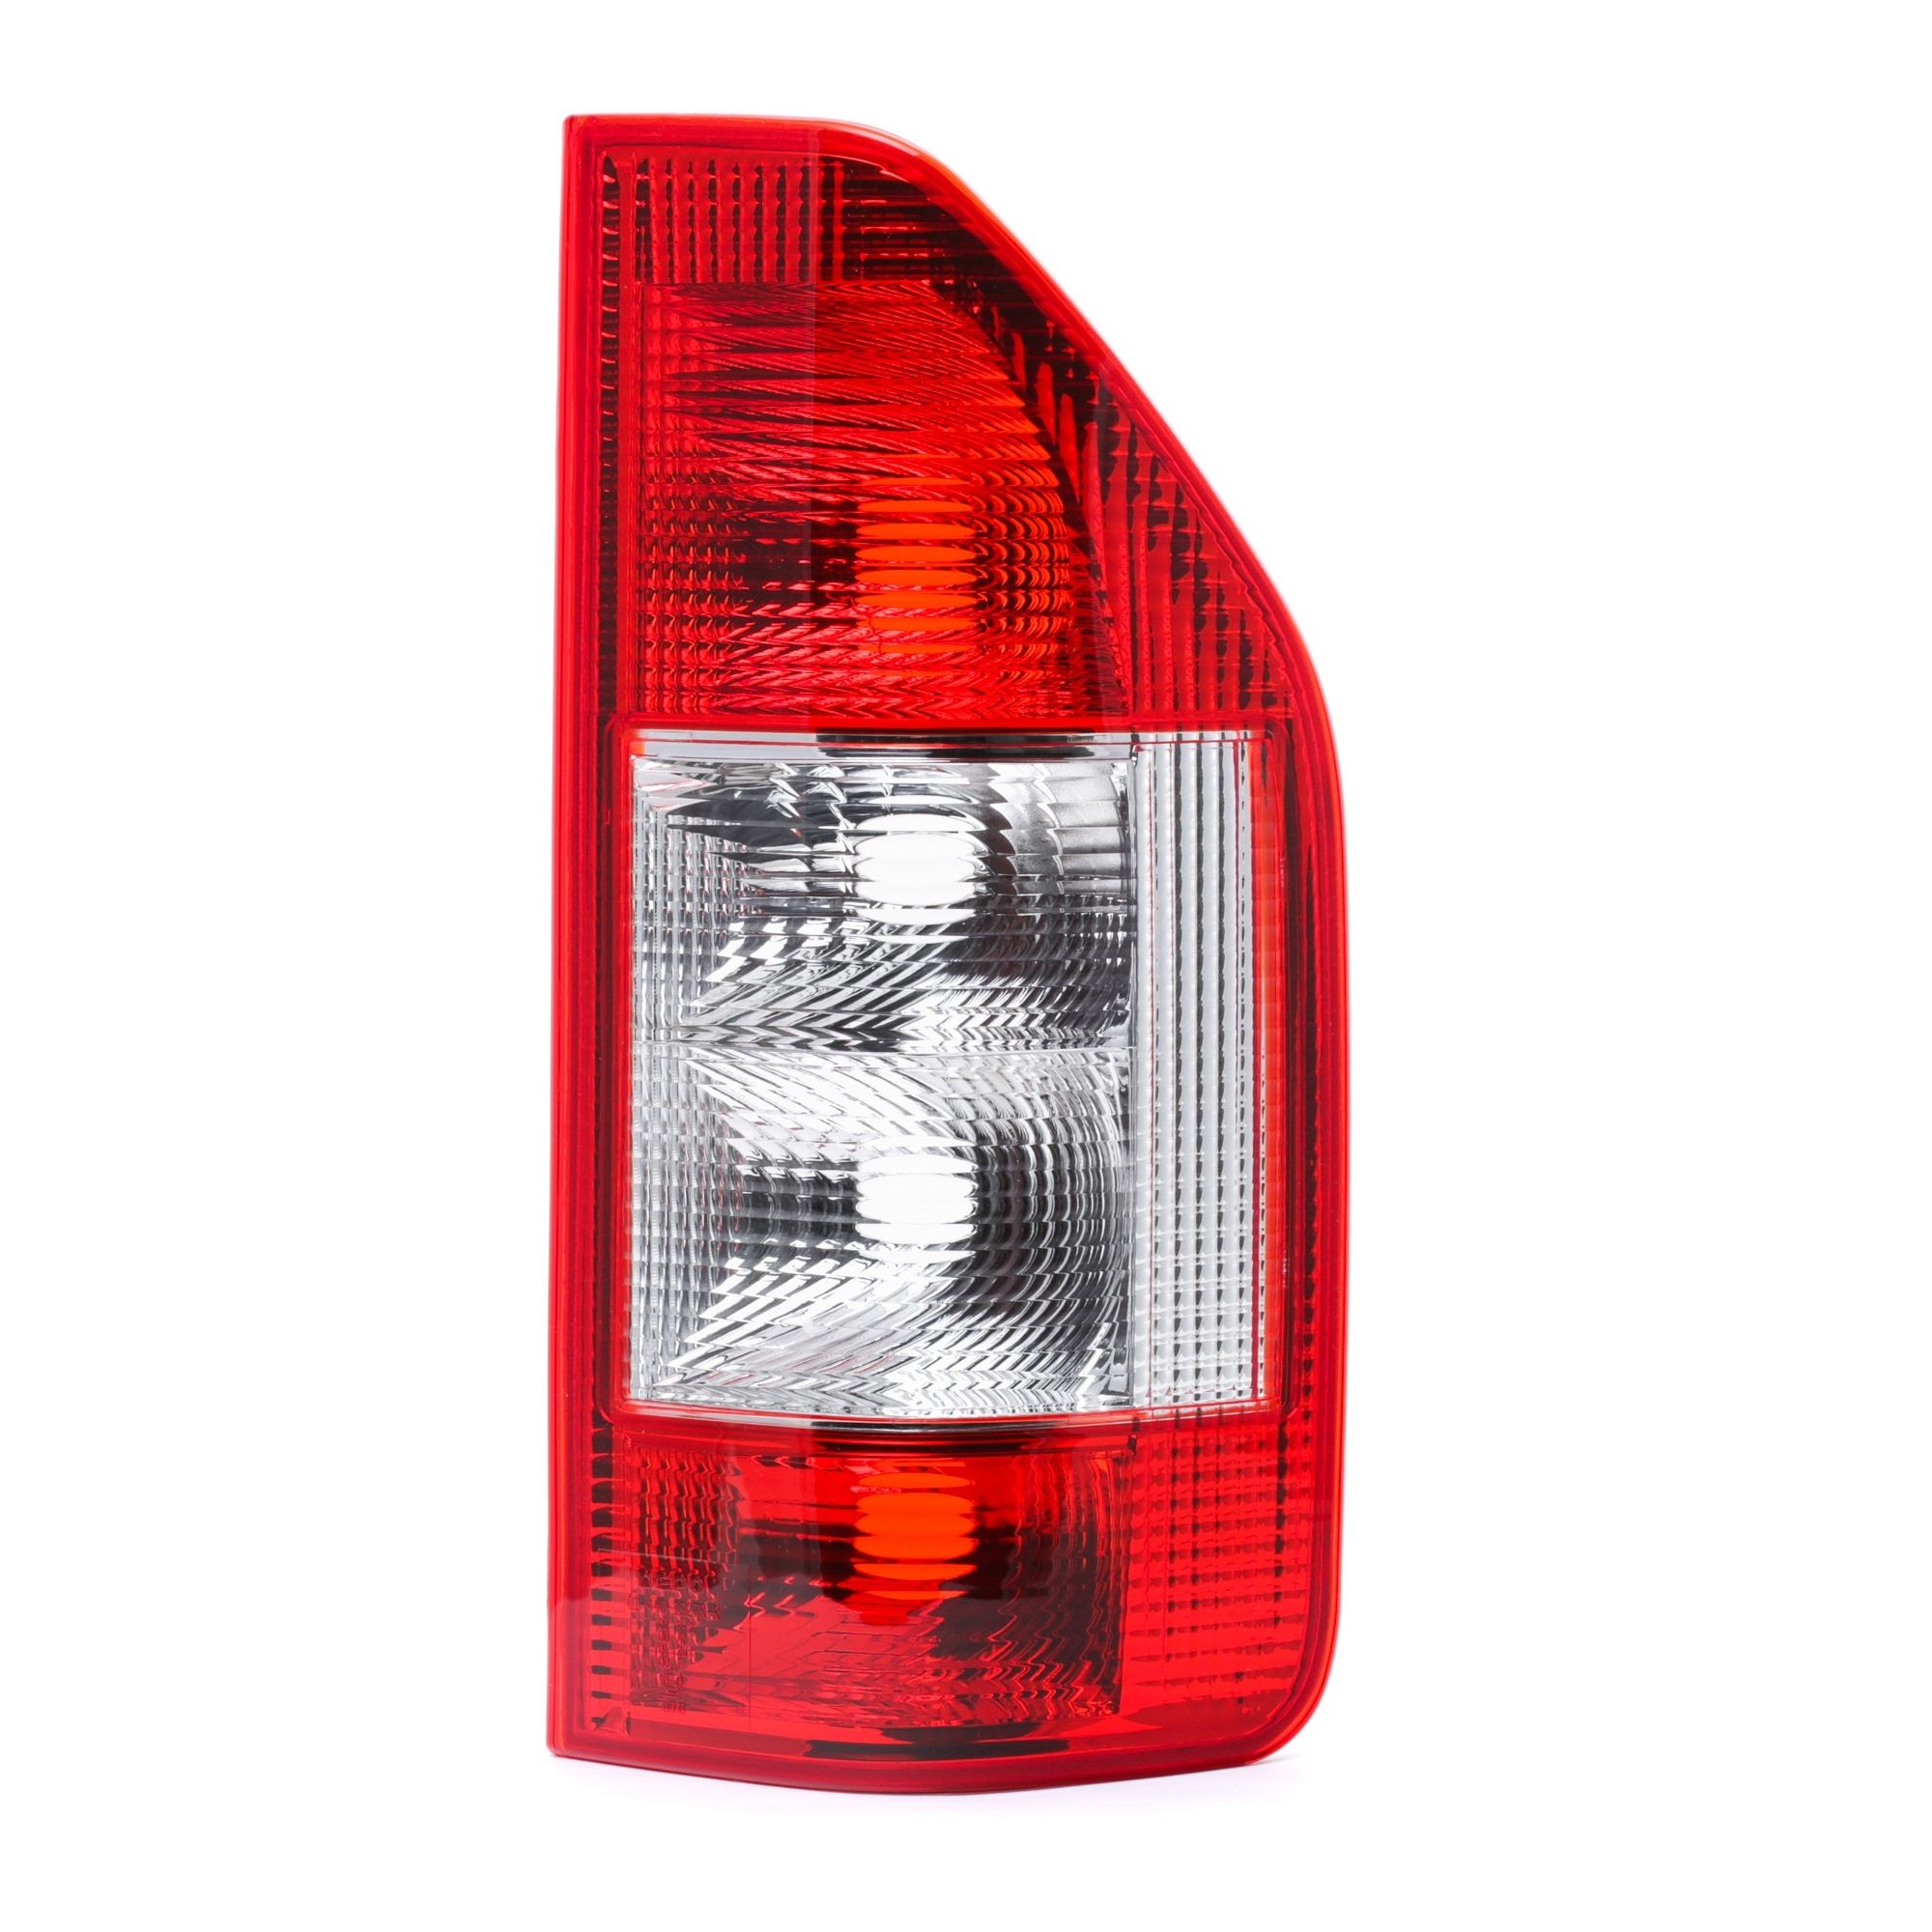 ABAKUS 440-1927R-UE Rear light Right, P21W, P21/5W, PY21W, without bulb holder, without bulb